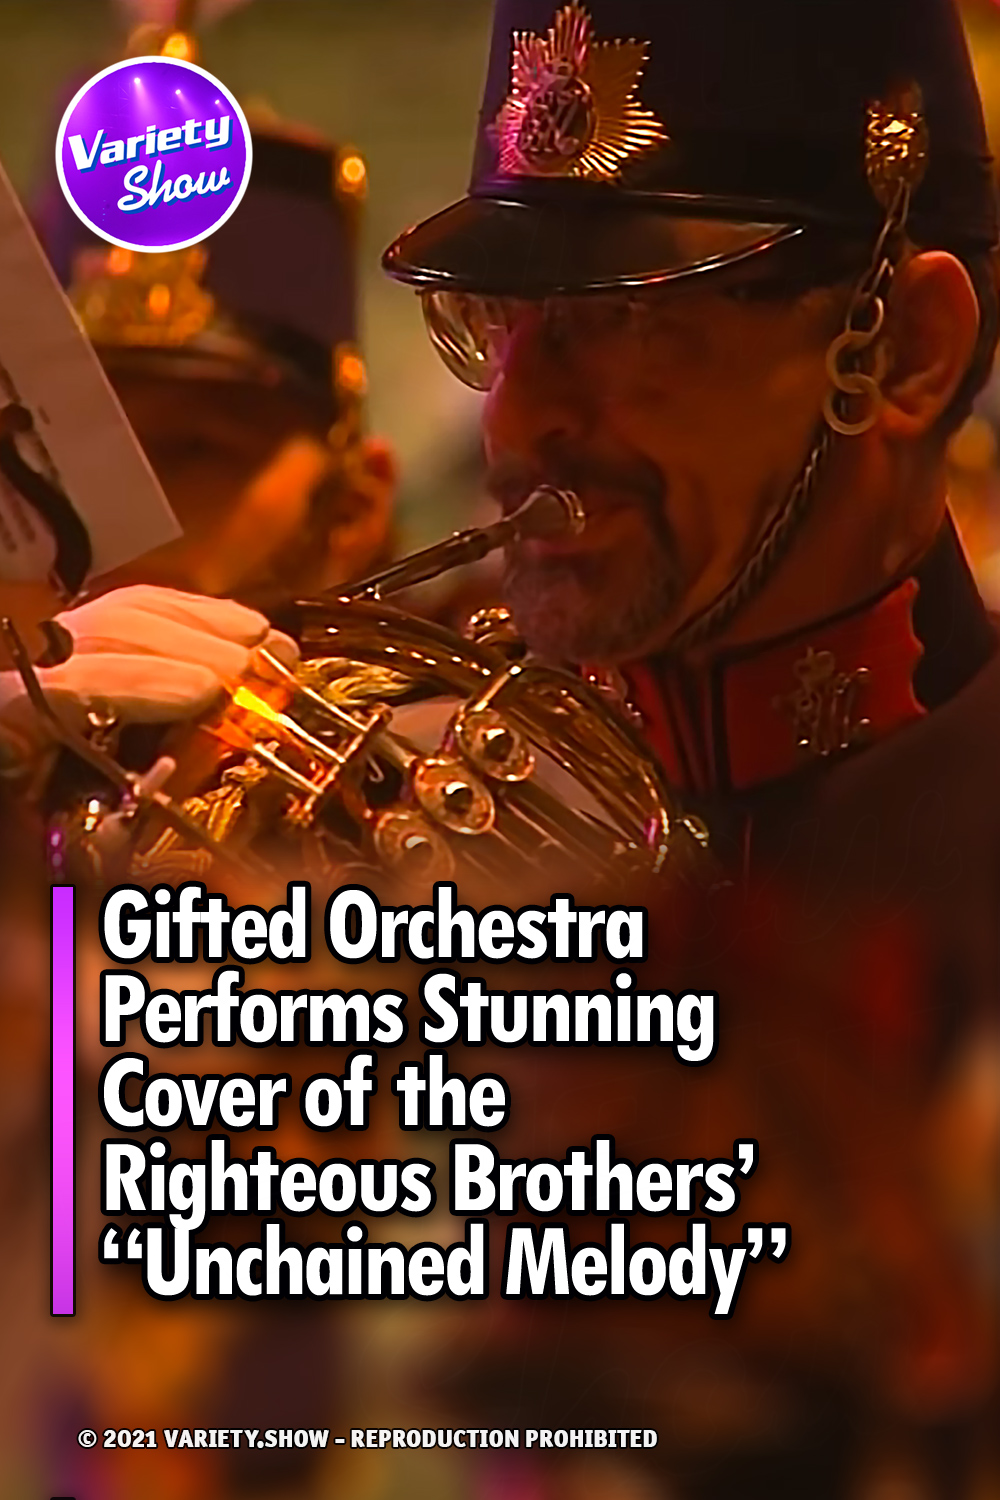 Gifted Orchestra Performs Stunning Cover of the Righteous Brothers’ “Unchained Melody”